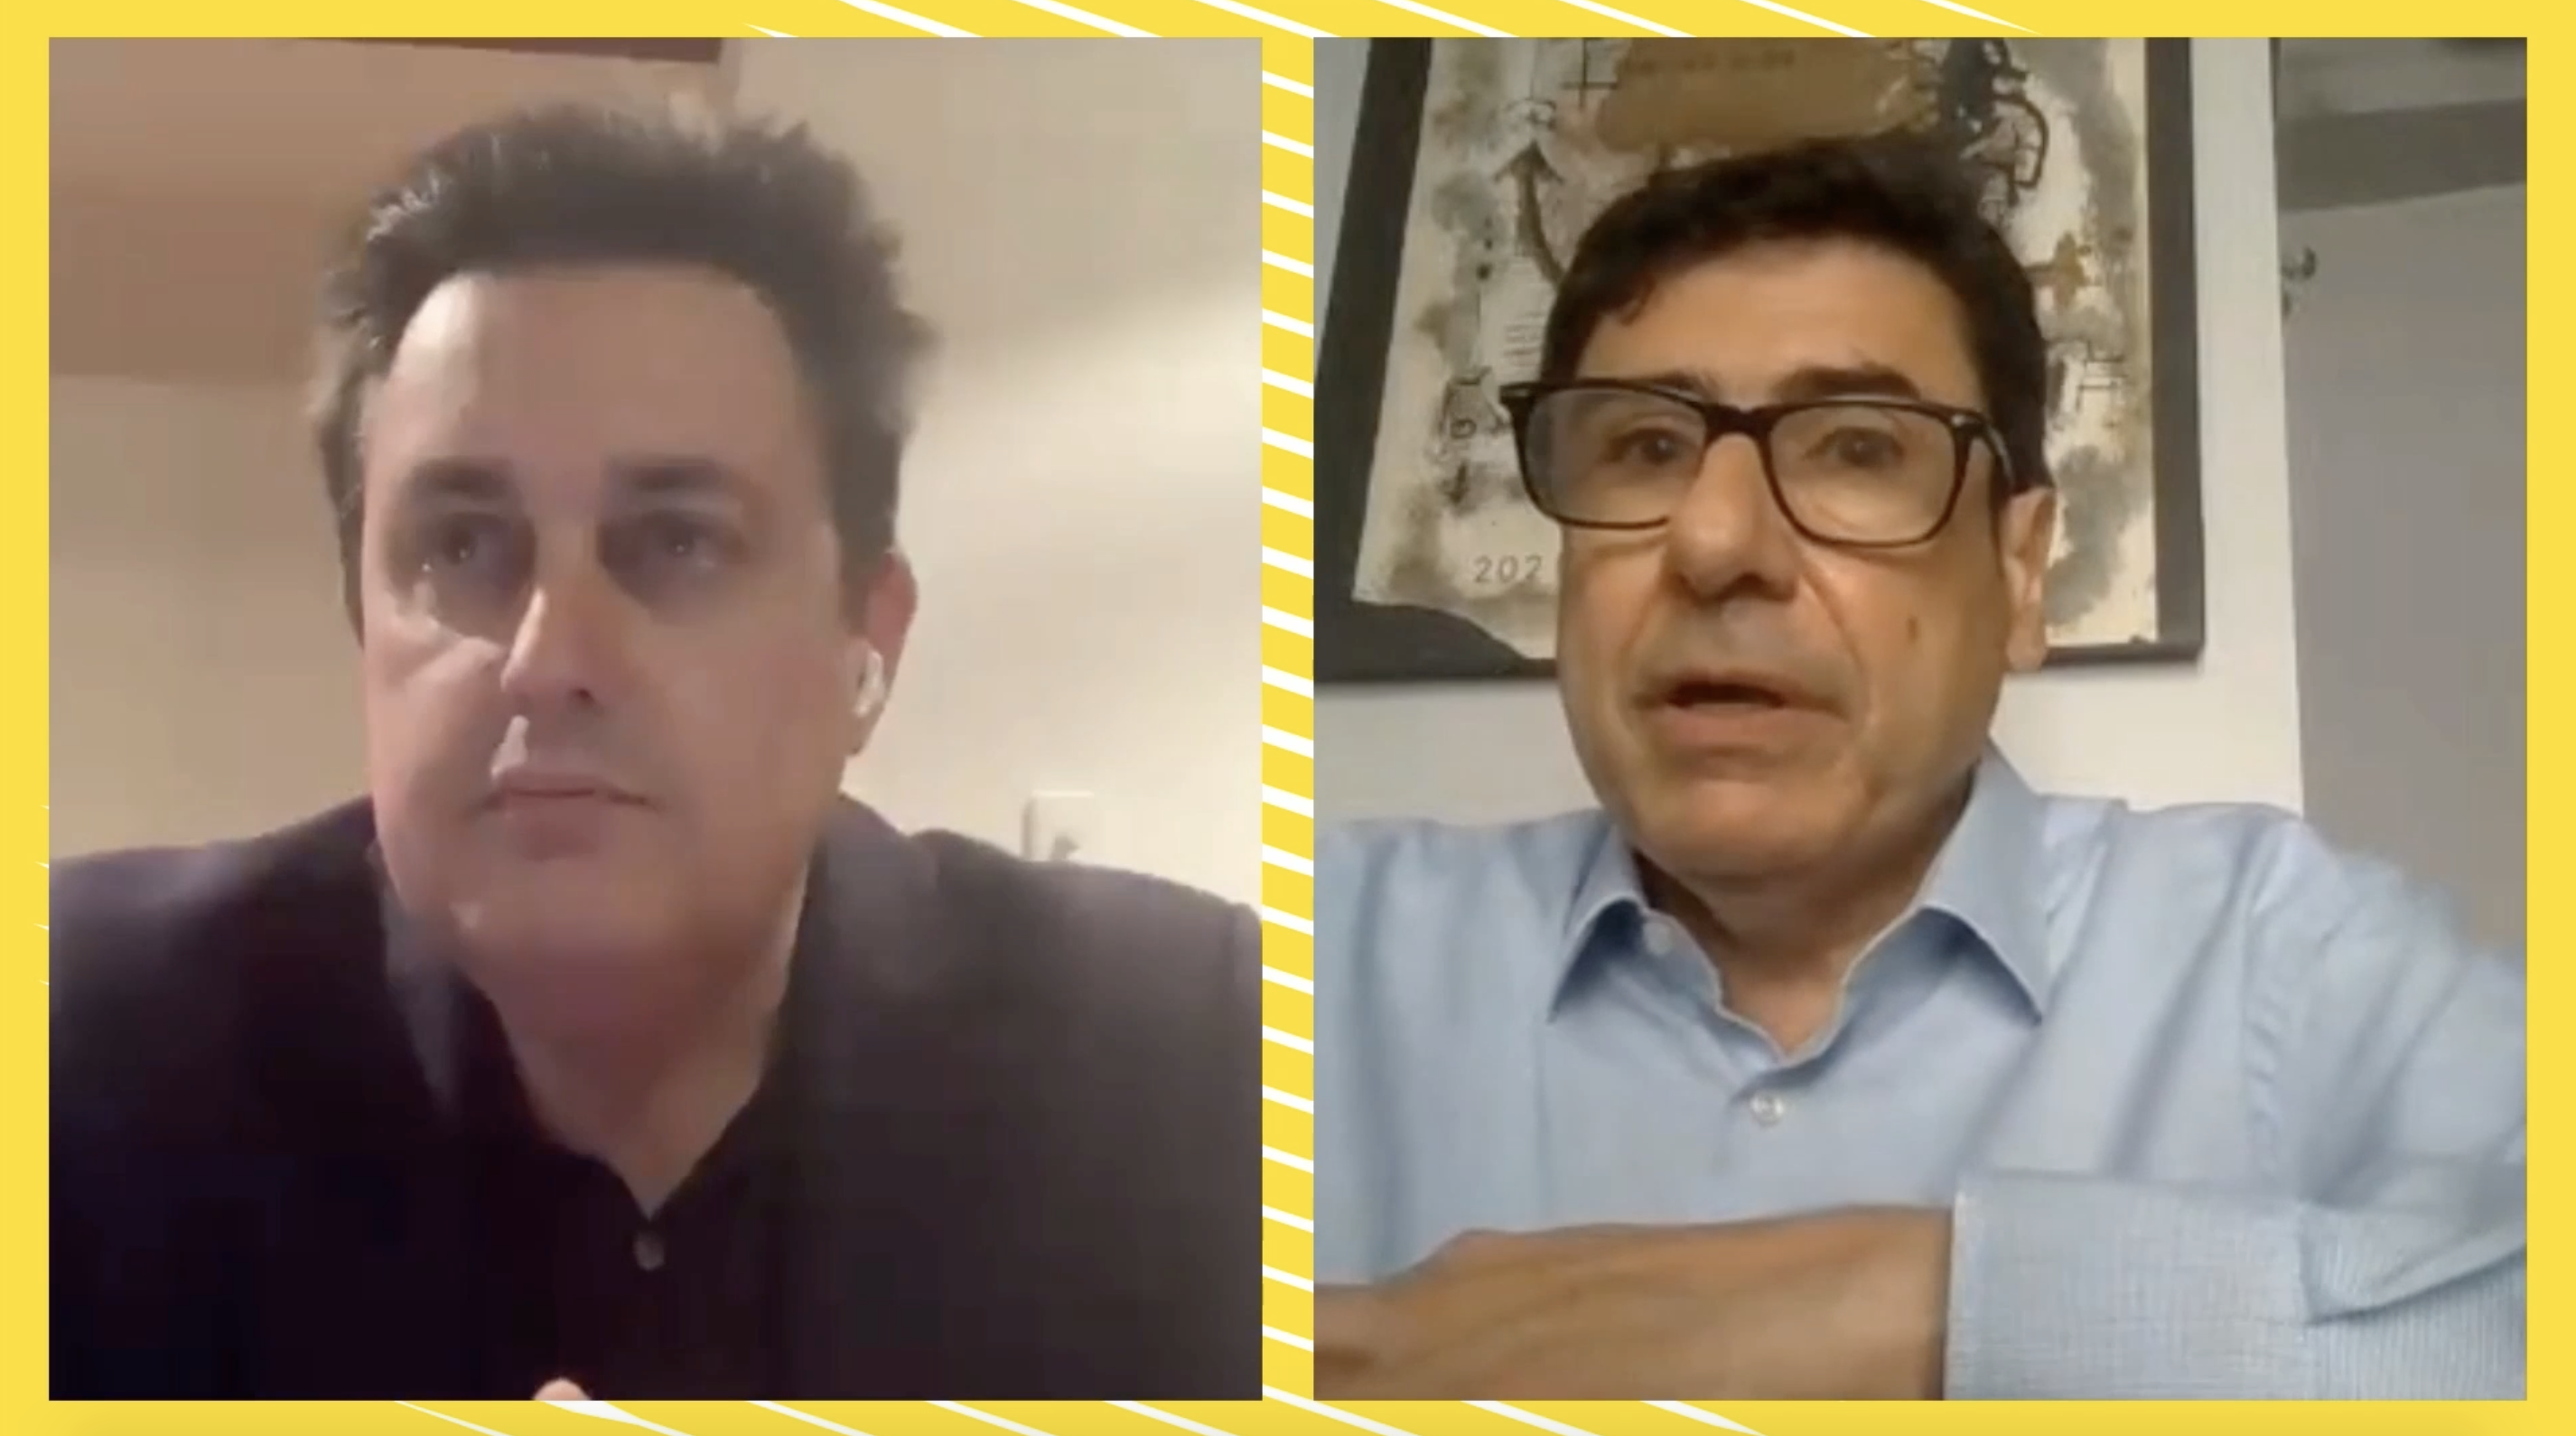 Richard Holden and Philippe Aghion